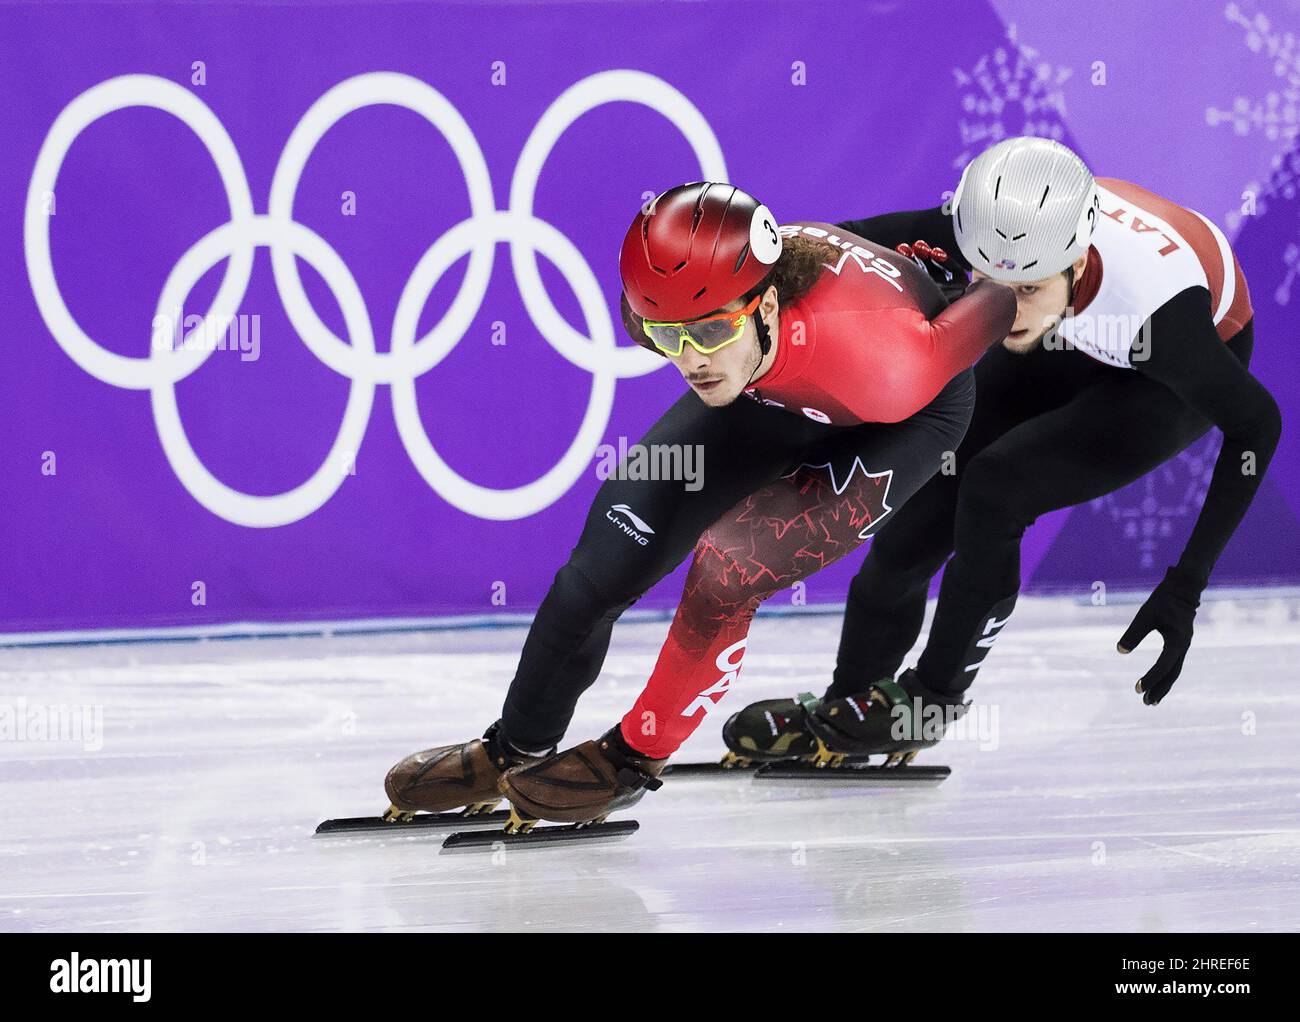 Samuel Girard, left, of Canada, competes in the heart two of the men's 500m short  track speed skating during the 2018 Olympic Winter Games in Gangneung,  South Korea on Tuesday, February 20,